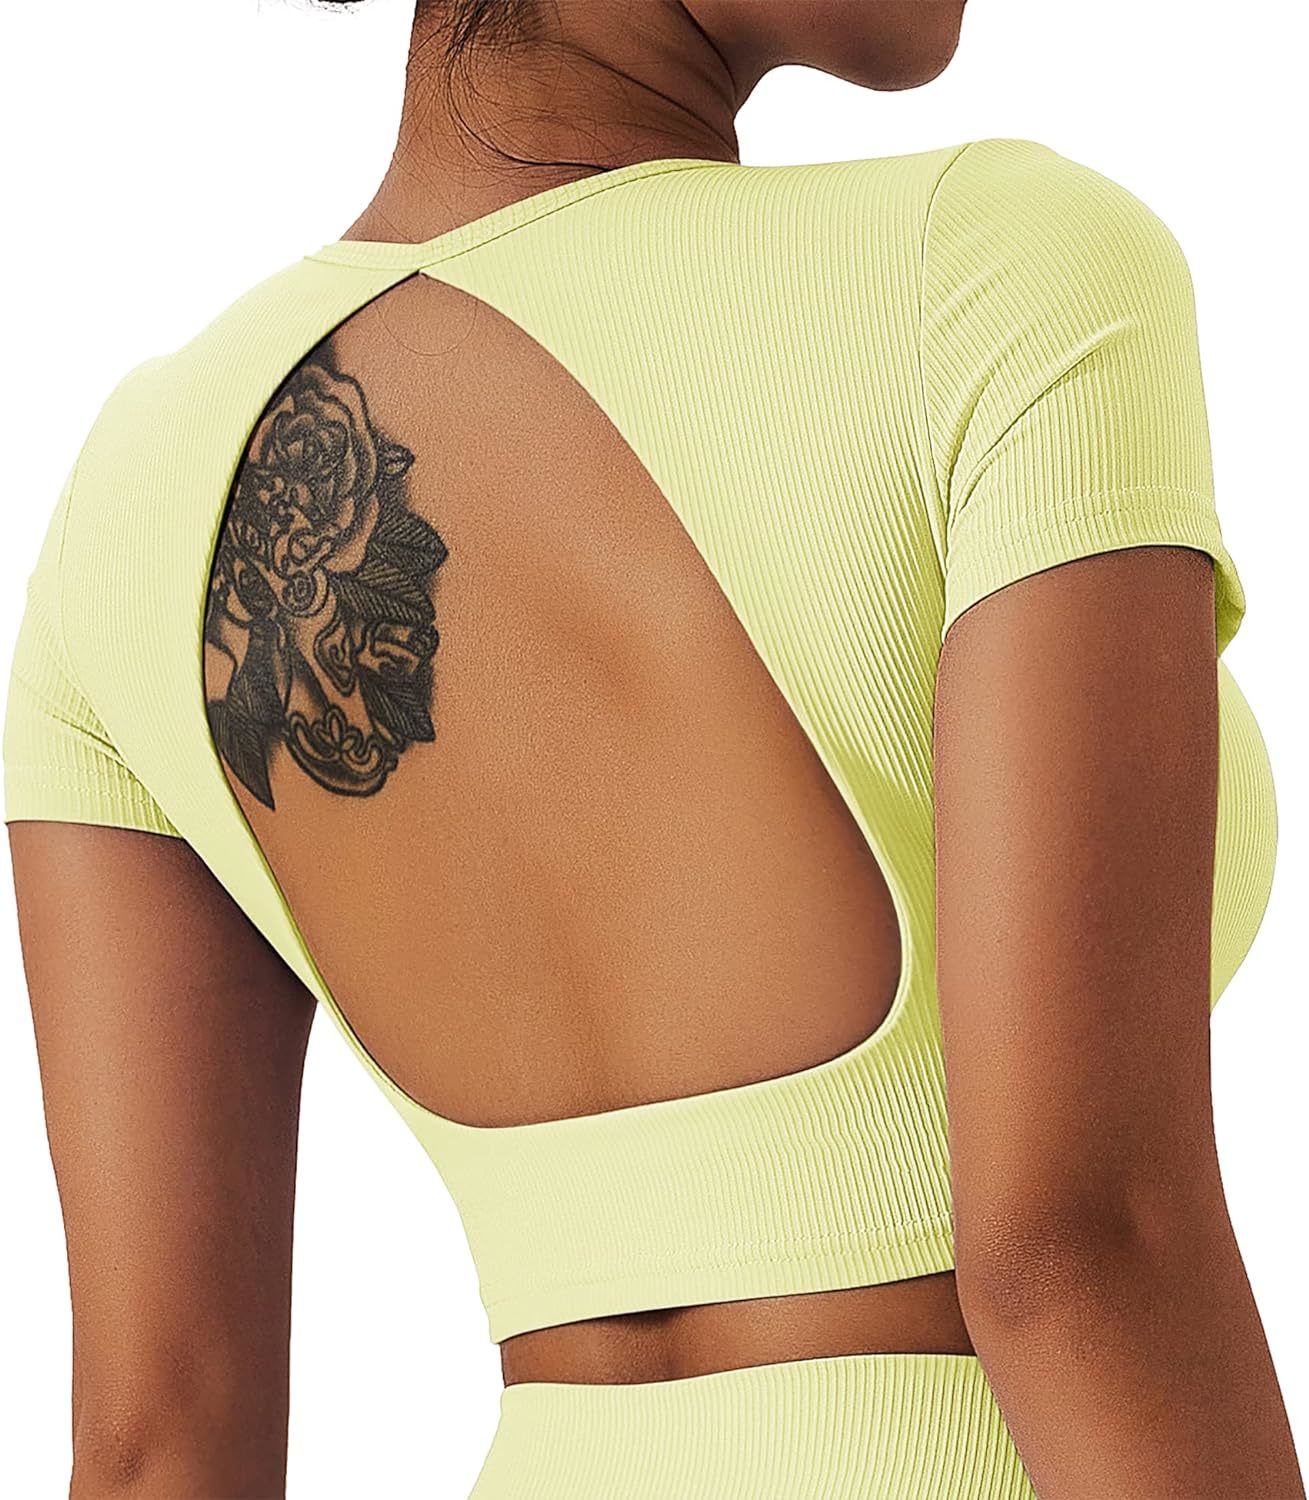 Primary image for Women's Open Back Cropped Top